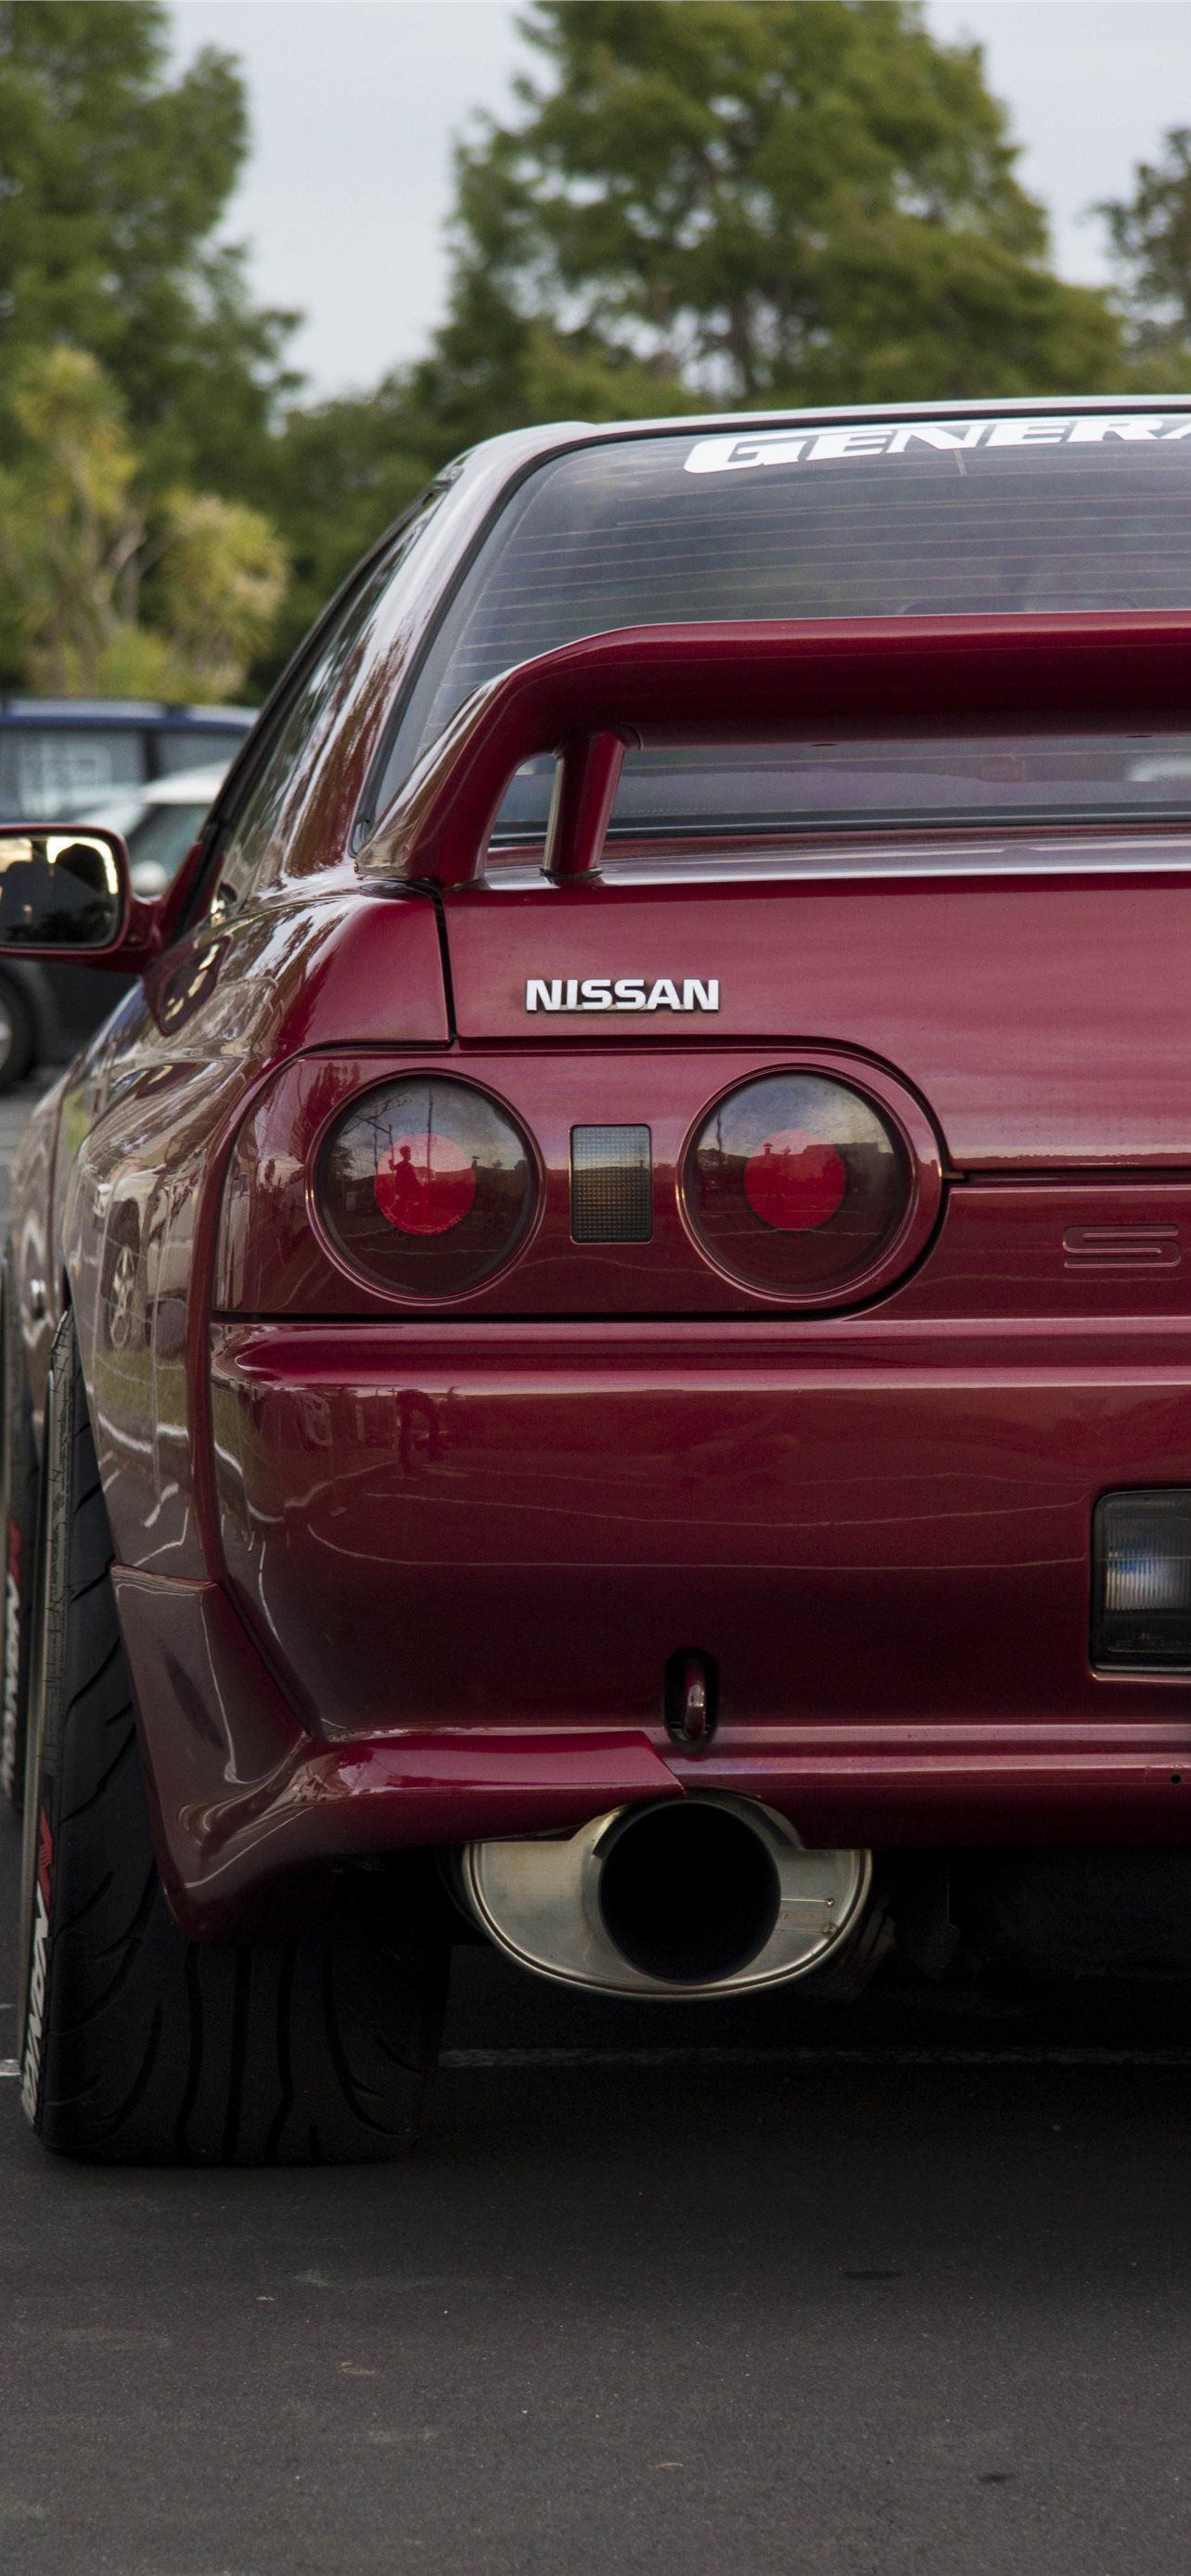 Nissan Skyline R32 wallpaper by lucky24x  Download on ZEDGE  013c